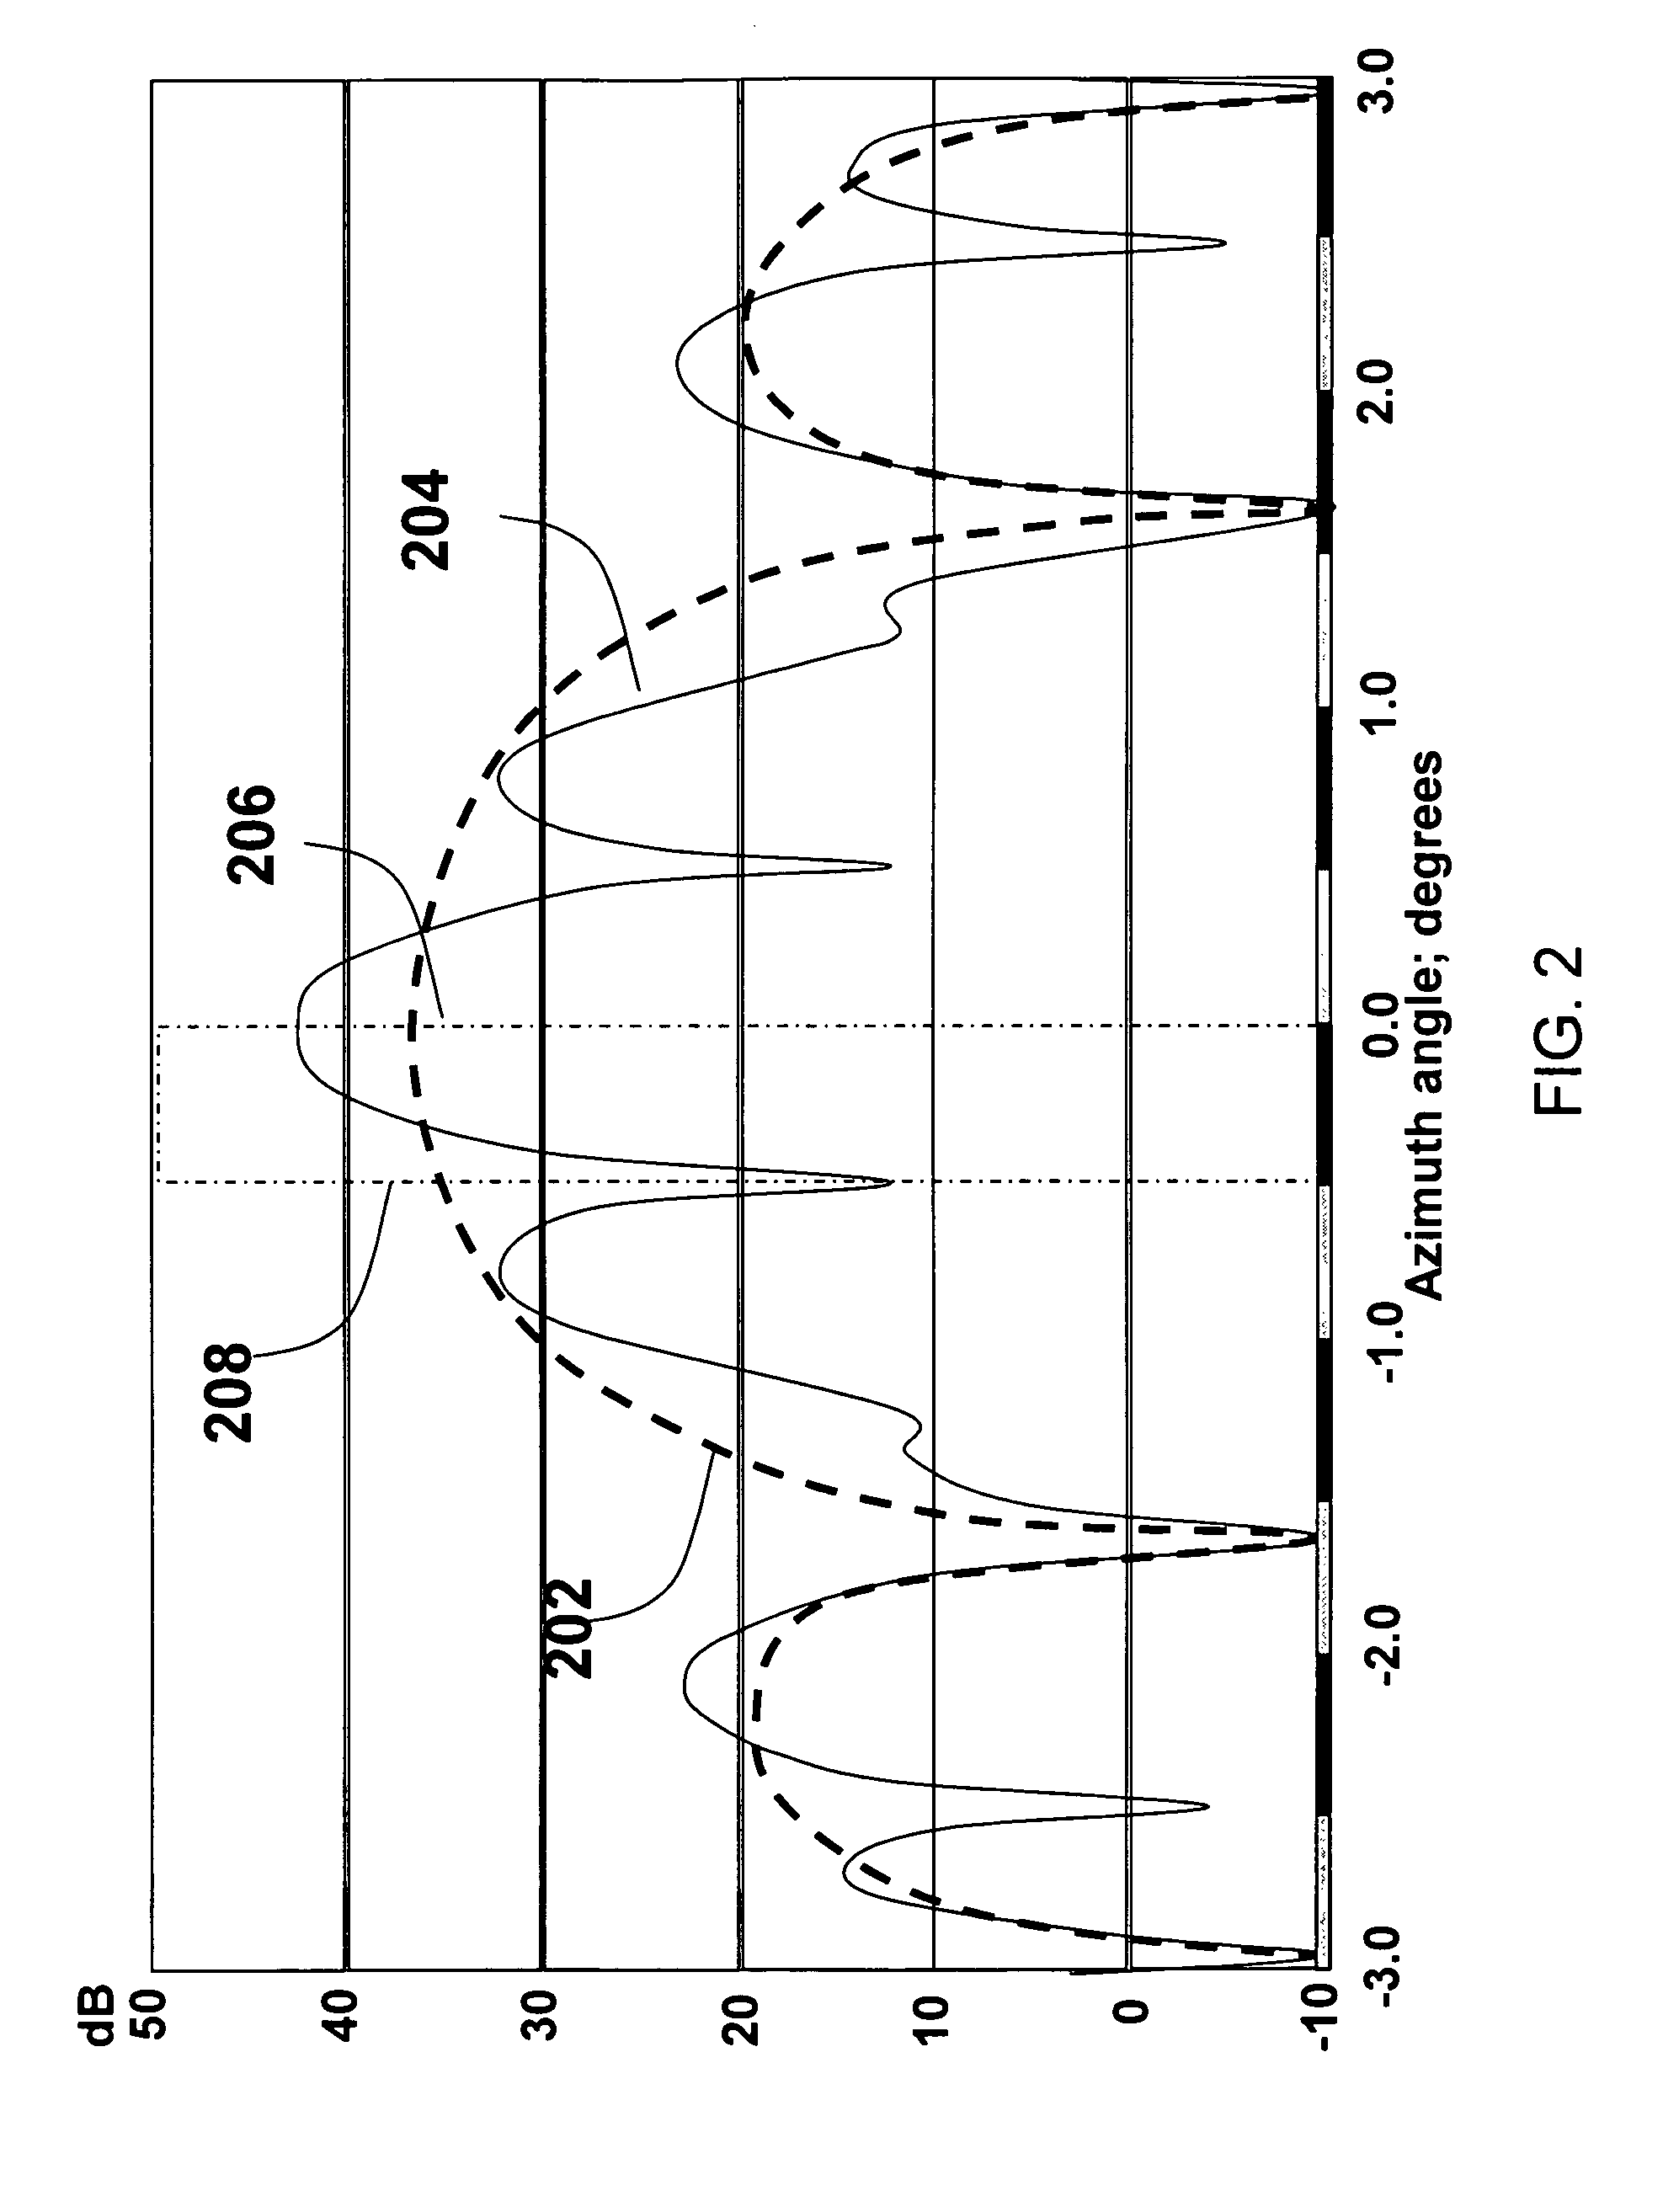 Satellite ground terminal incorporating a smart antenna that rejects interference